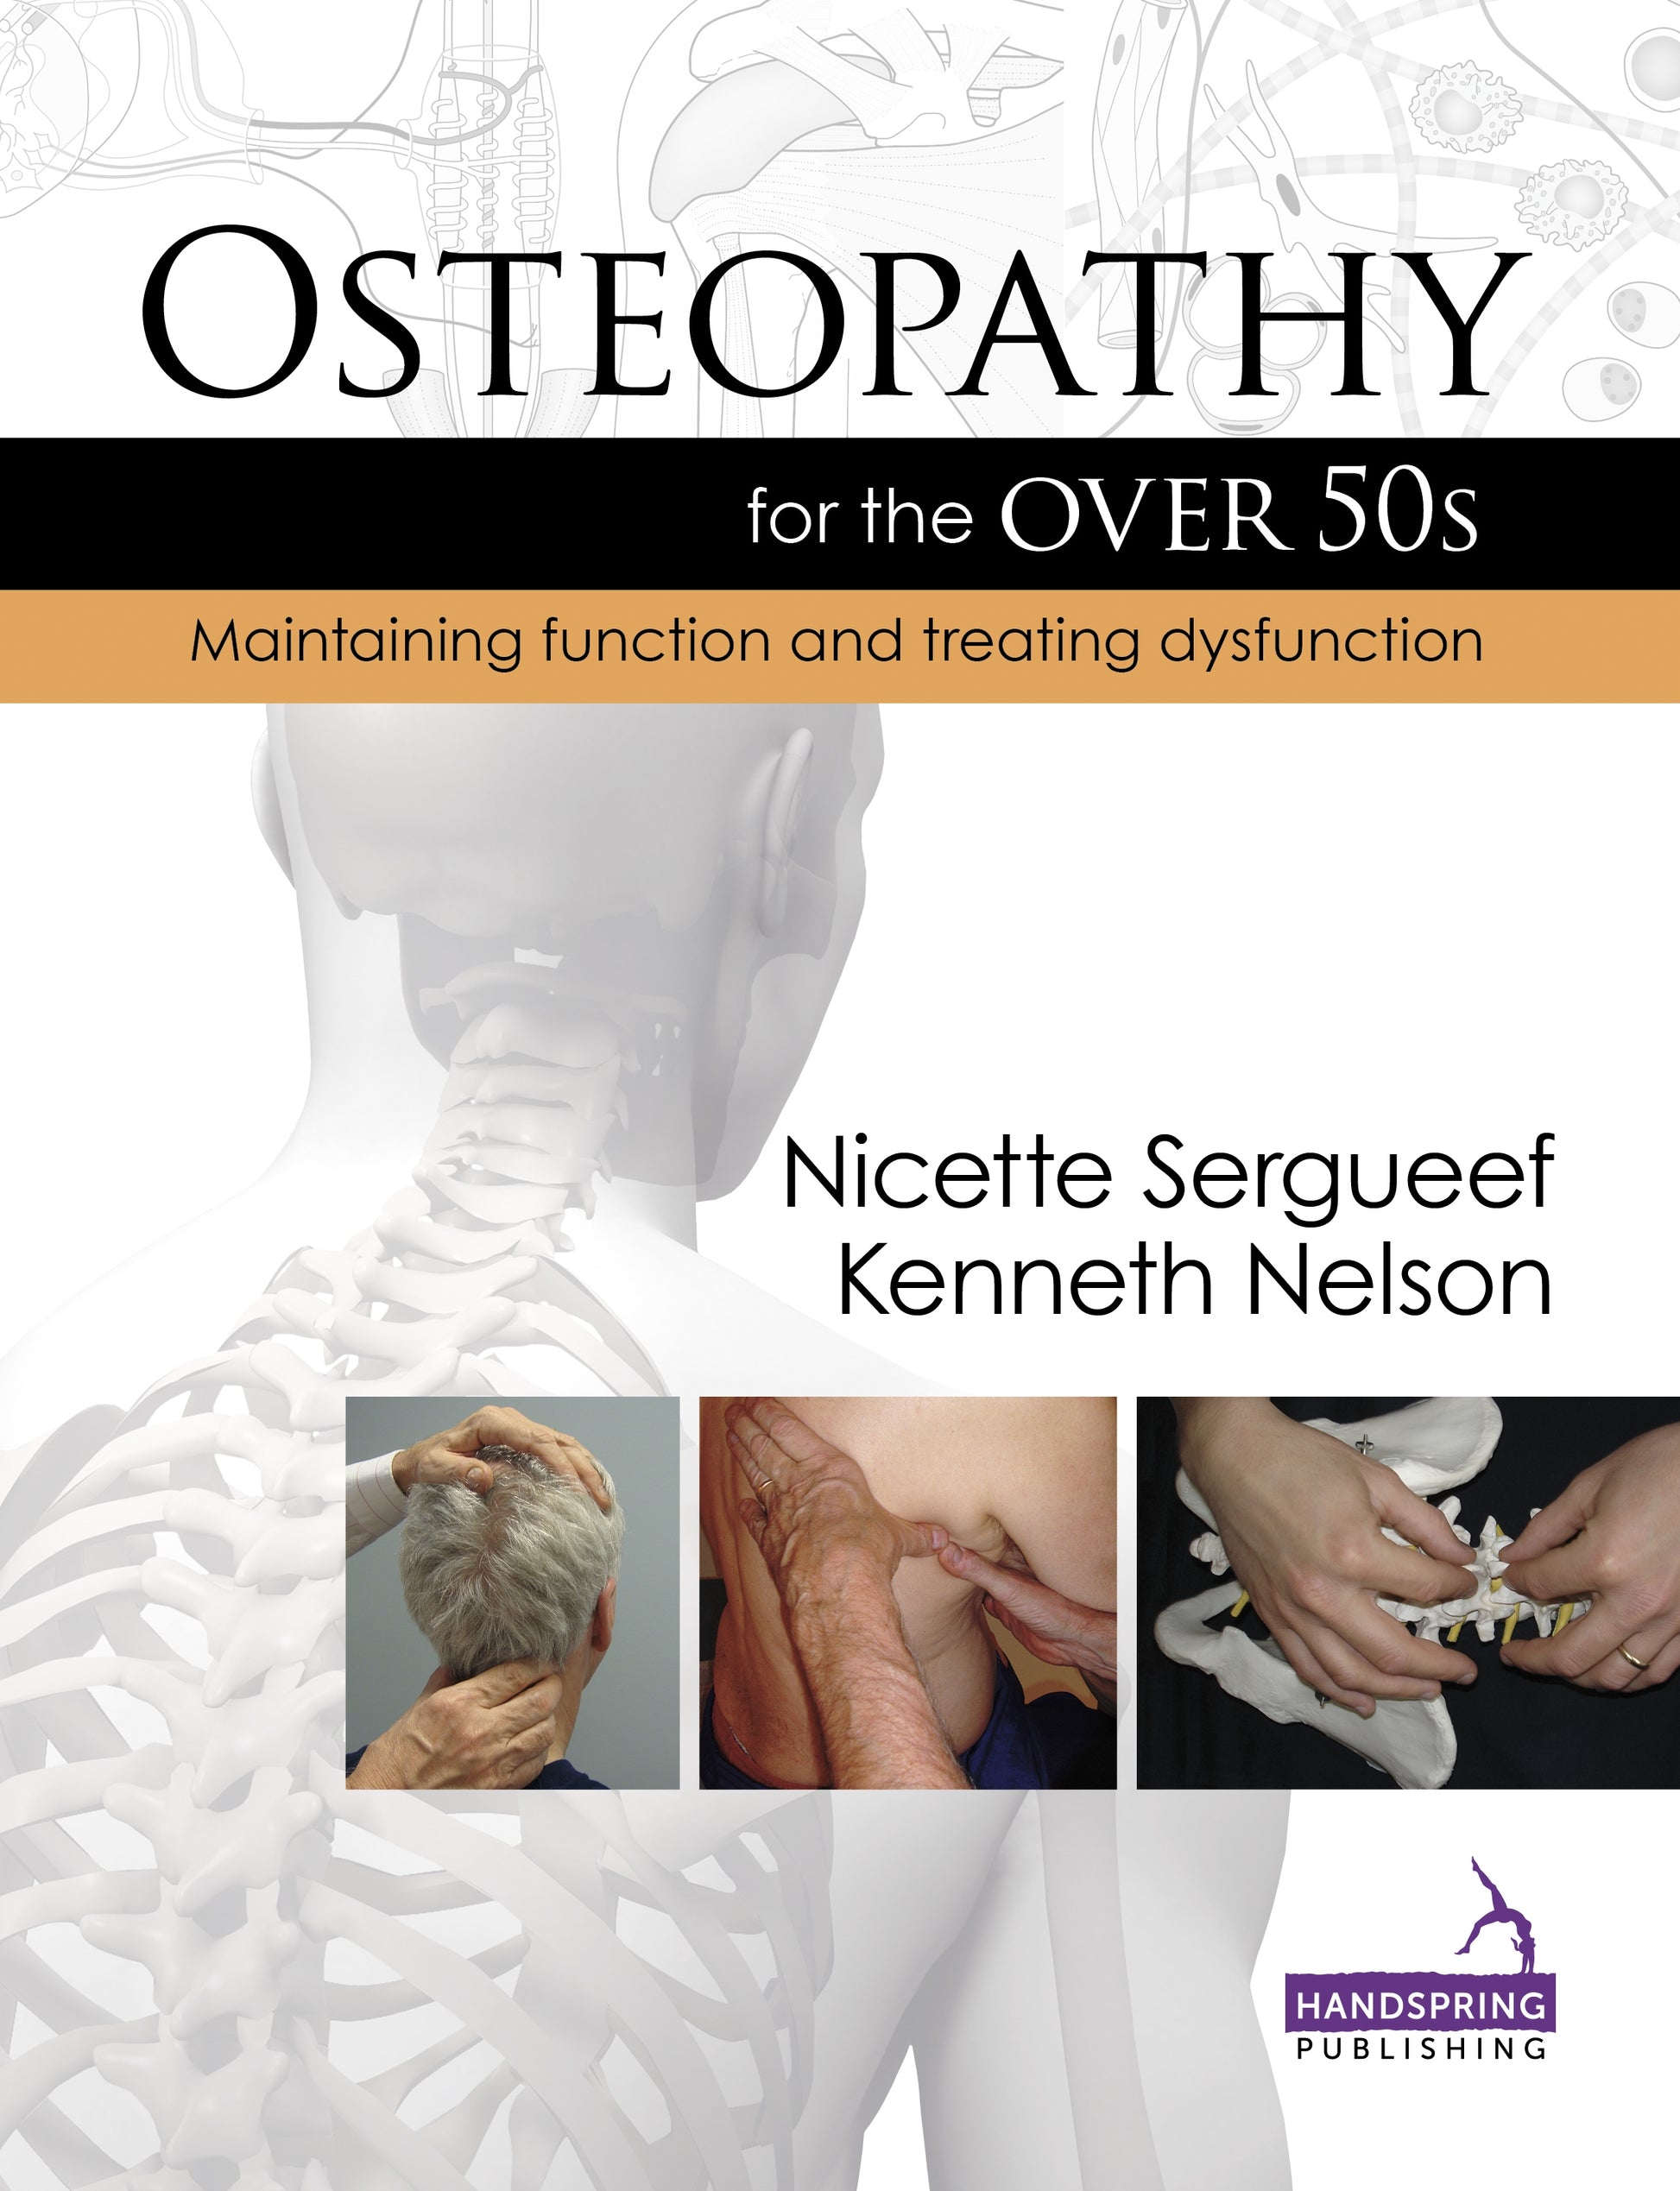 Osteopathy for the Over 50s by Kenneth Nelson, Nicette Sergueef